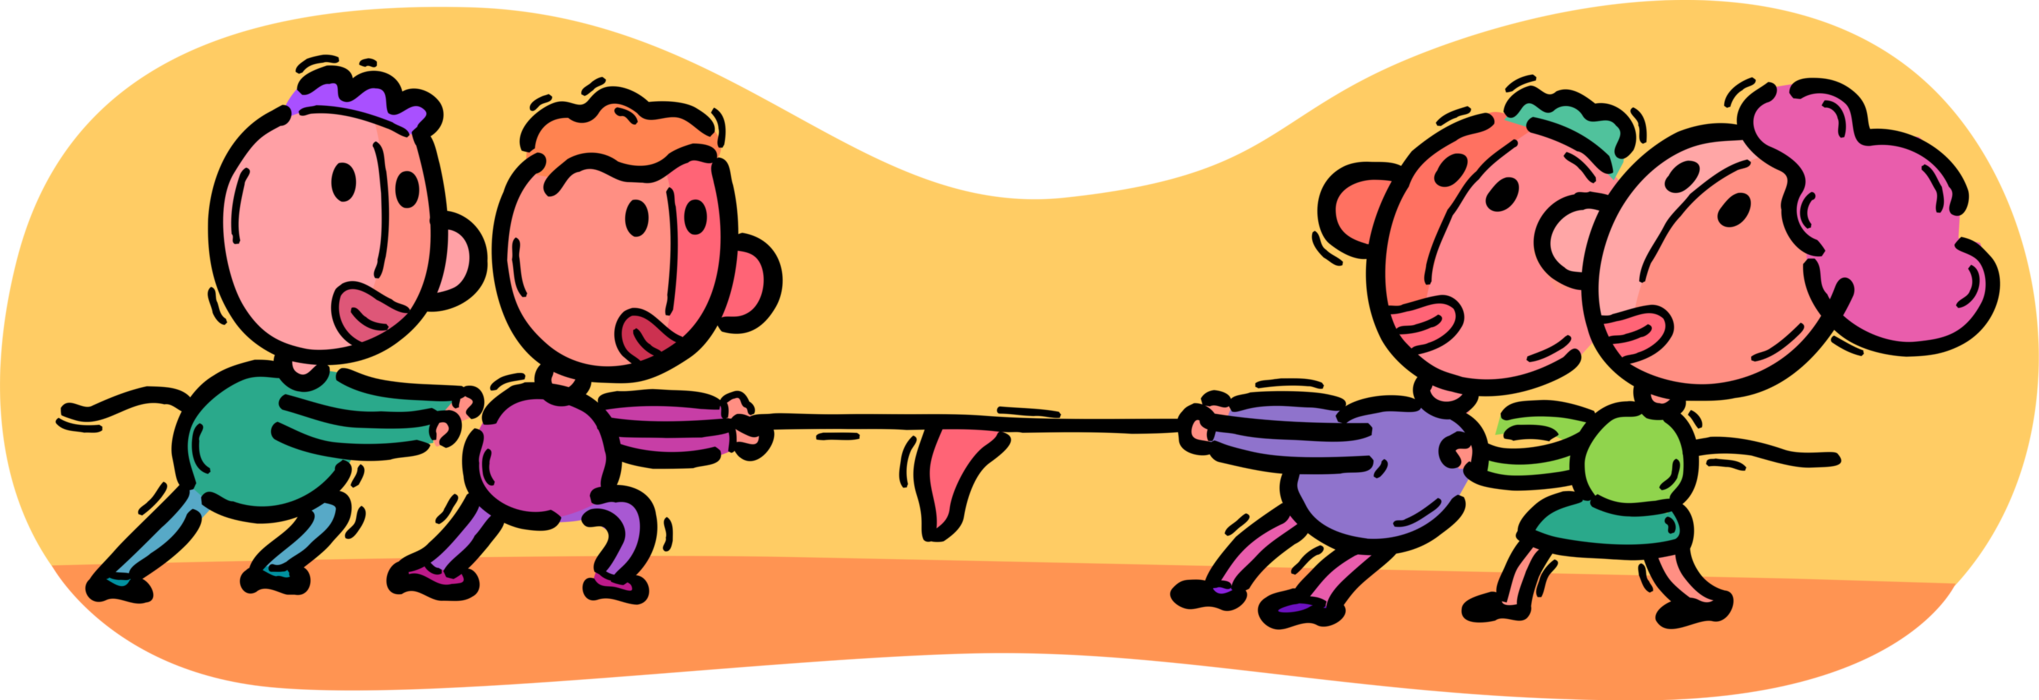 Vector Illustration of Business Colleagues in Tug-of-War Competition with Rope